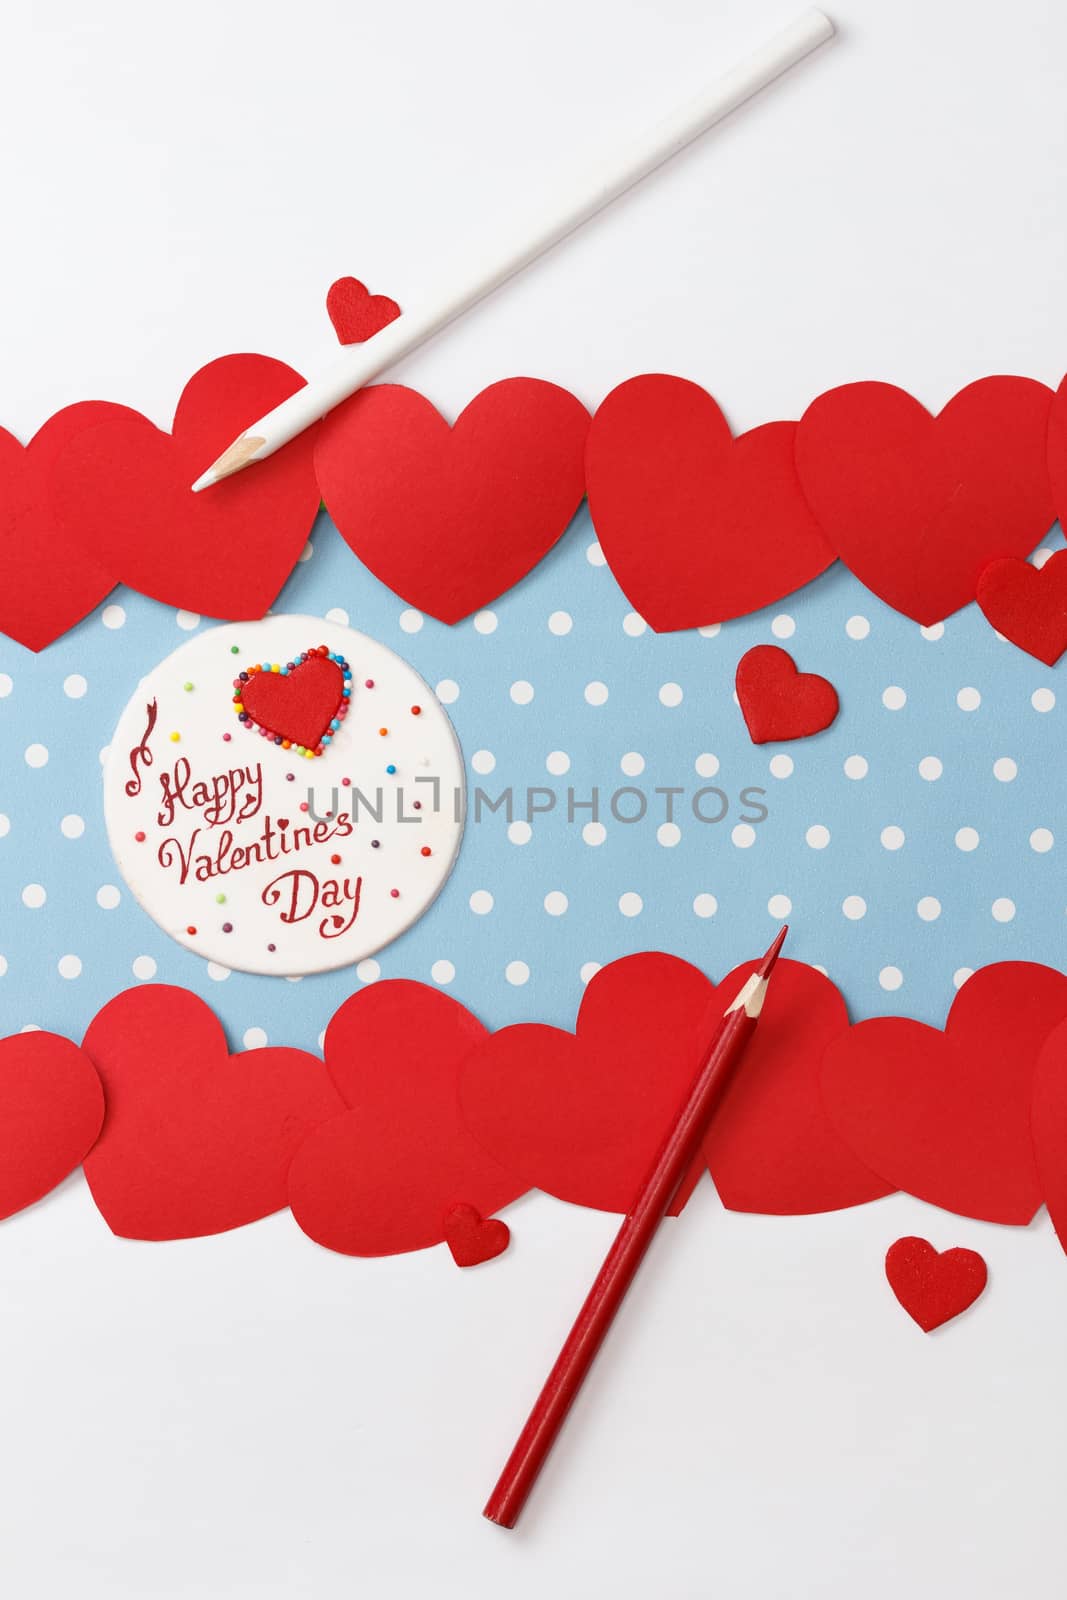 Valentine's day love message, handmade, with pencils and hearts isolated on blue with white dots background (polka dot) with white borders